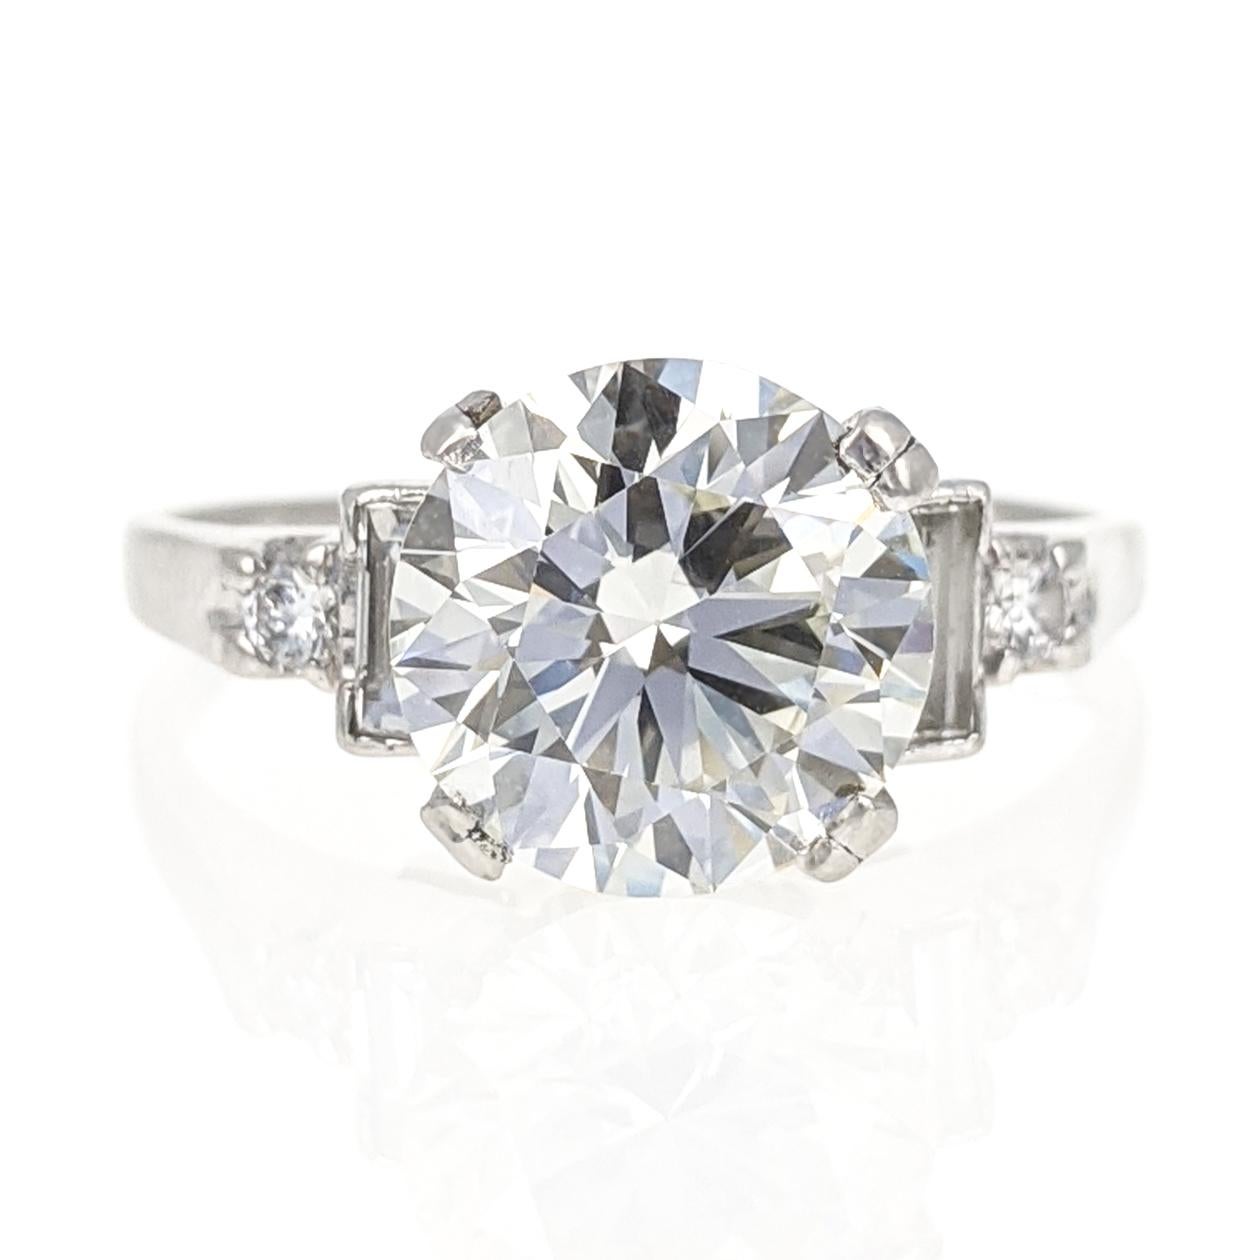 This ring centers upon a 3.02 carat round brilliant-cut diamond, flanked on each side by a baguette-cut and round brilliant-cut diamond for an additional diamond weight of approximately .22 carat. Set in platinum. Size 8.5.

With GIA report no.